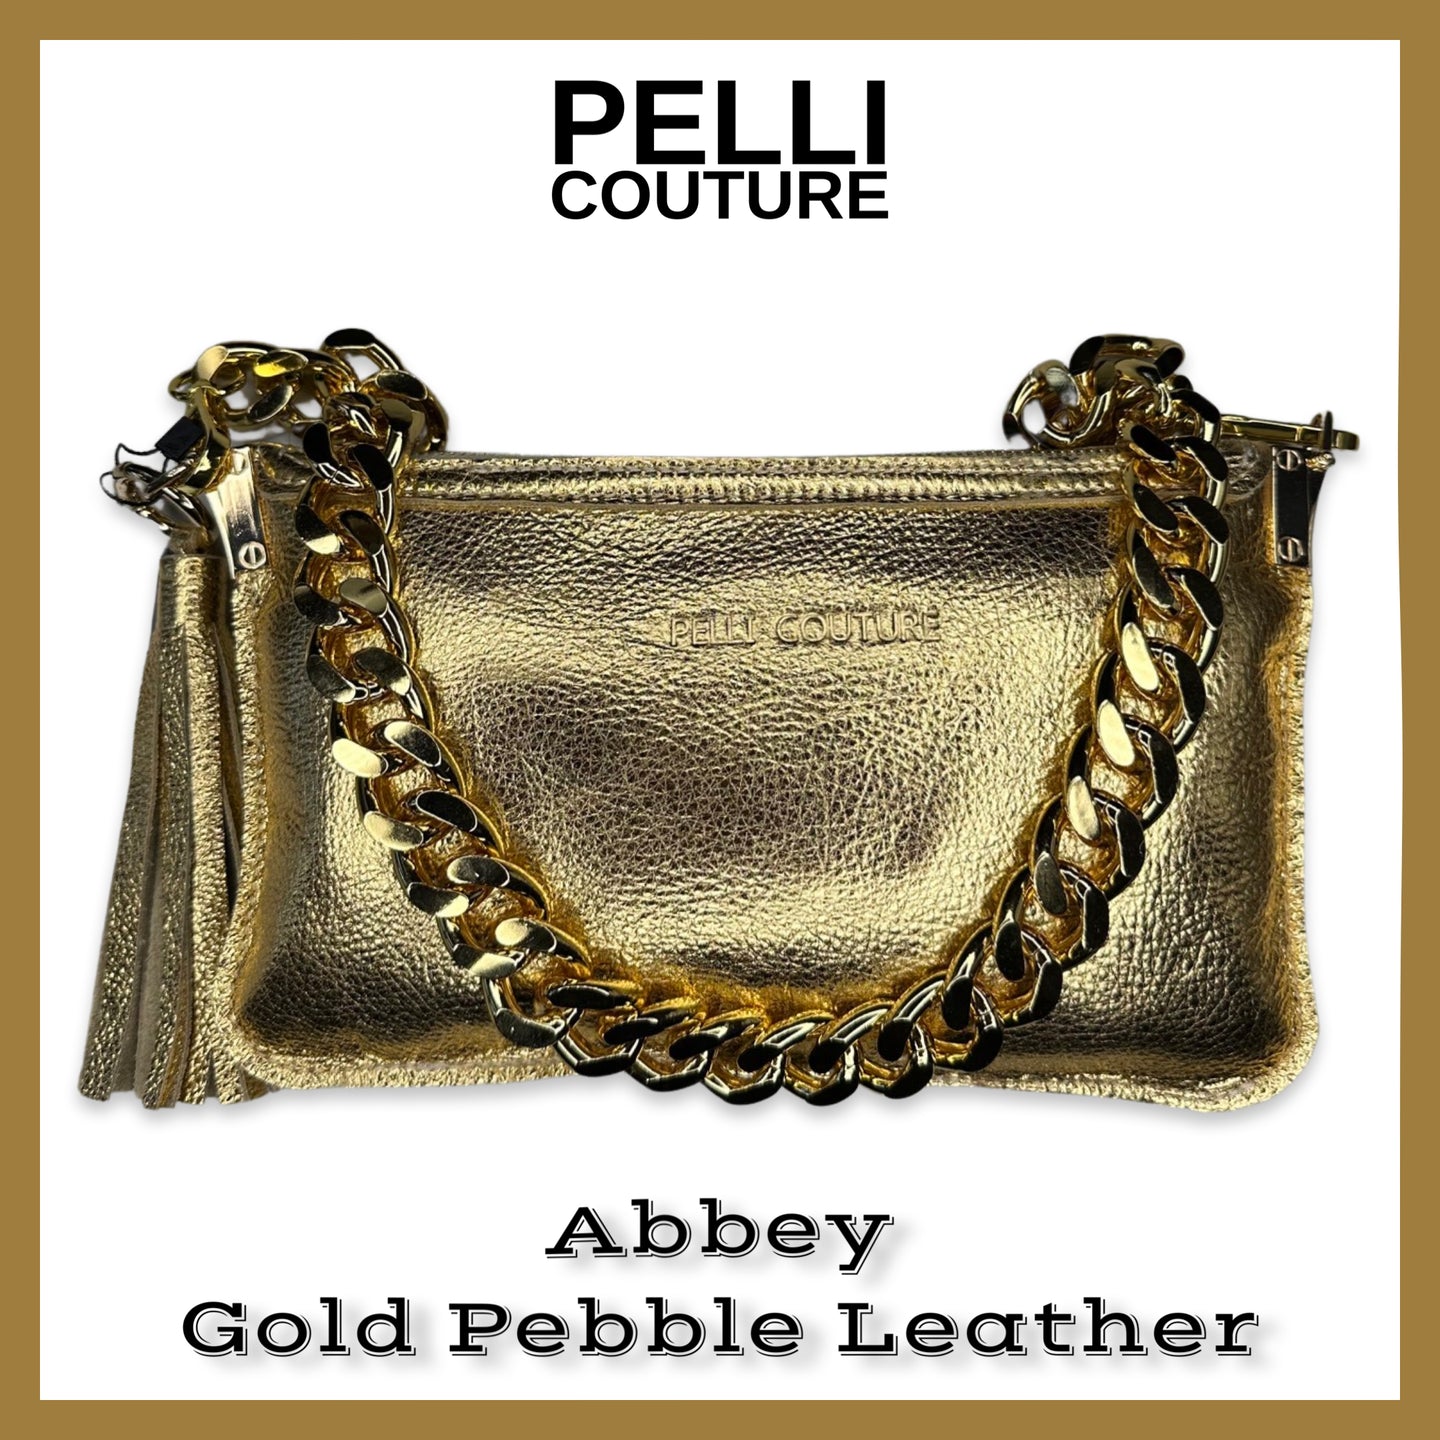 Abbey- Gold Pebble Leather